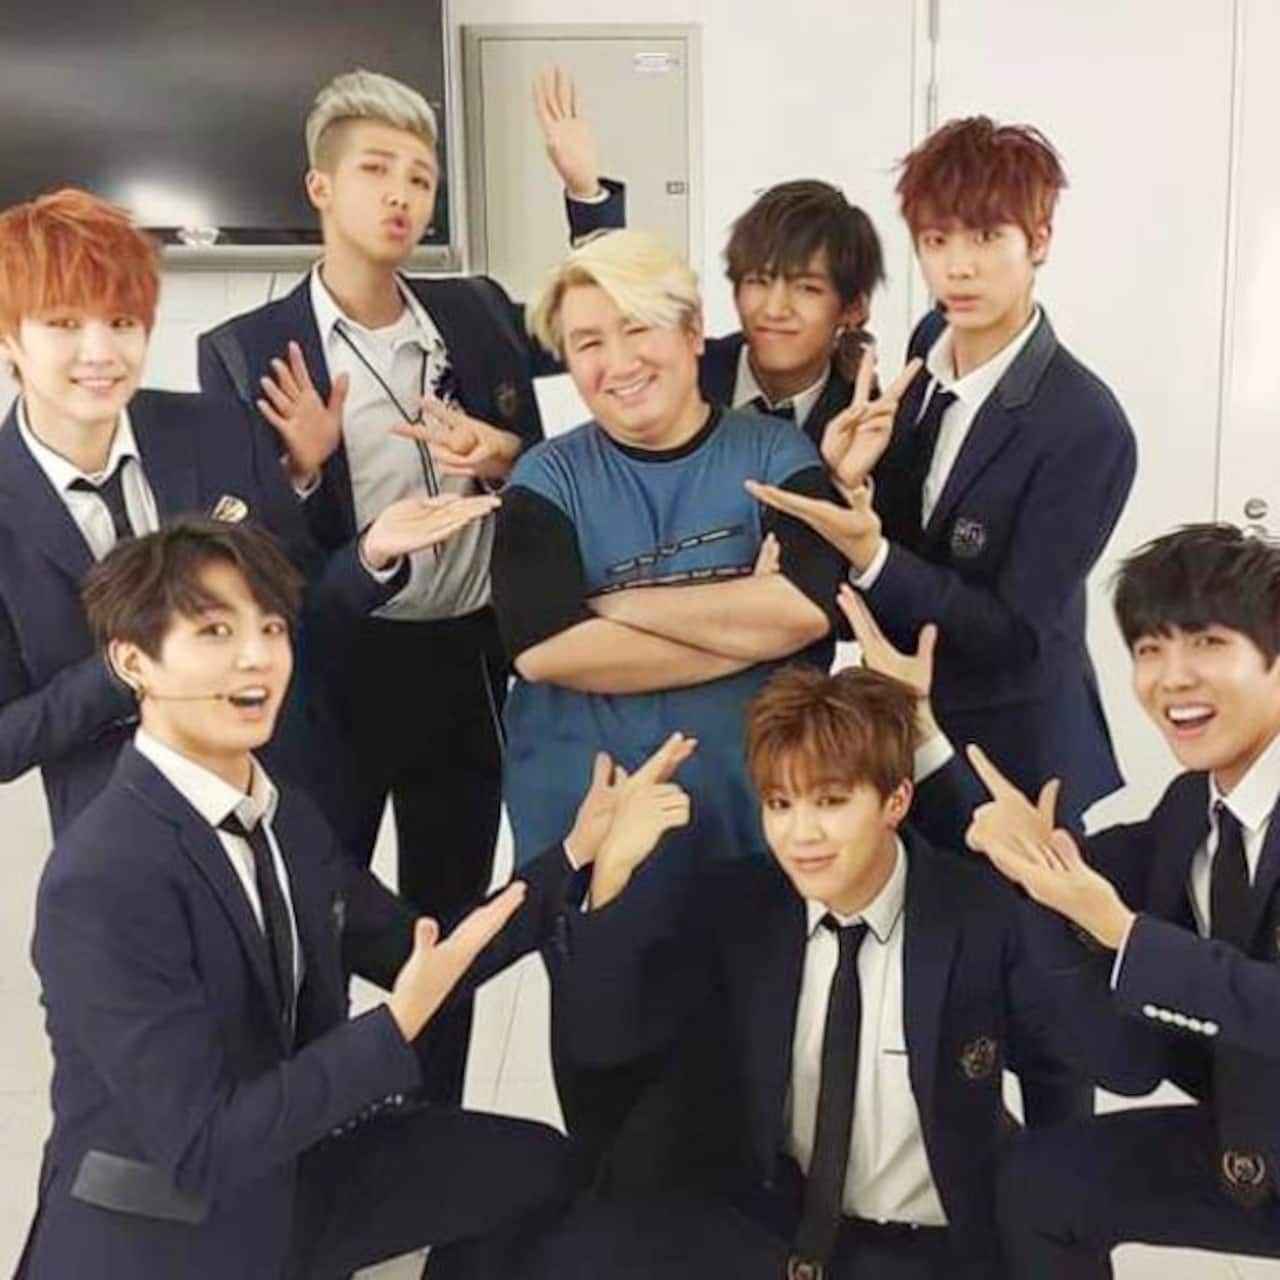 BTS head Bang PD in dating rumours